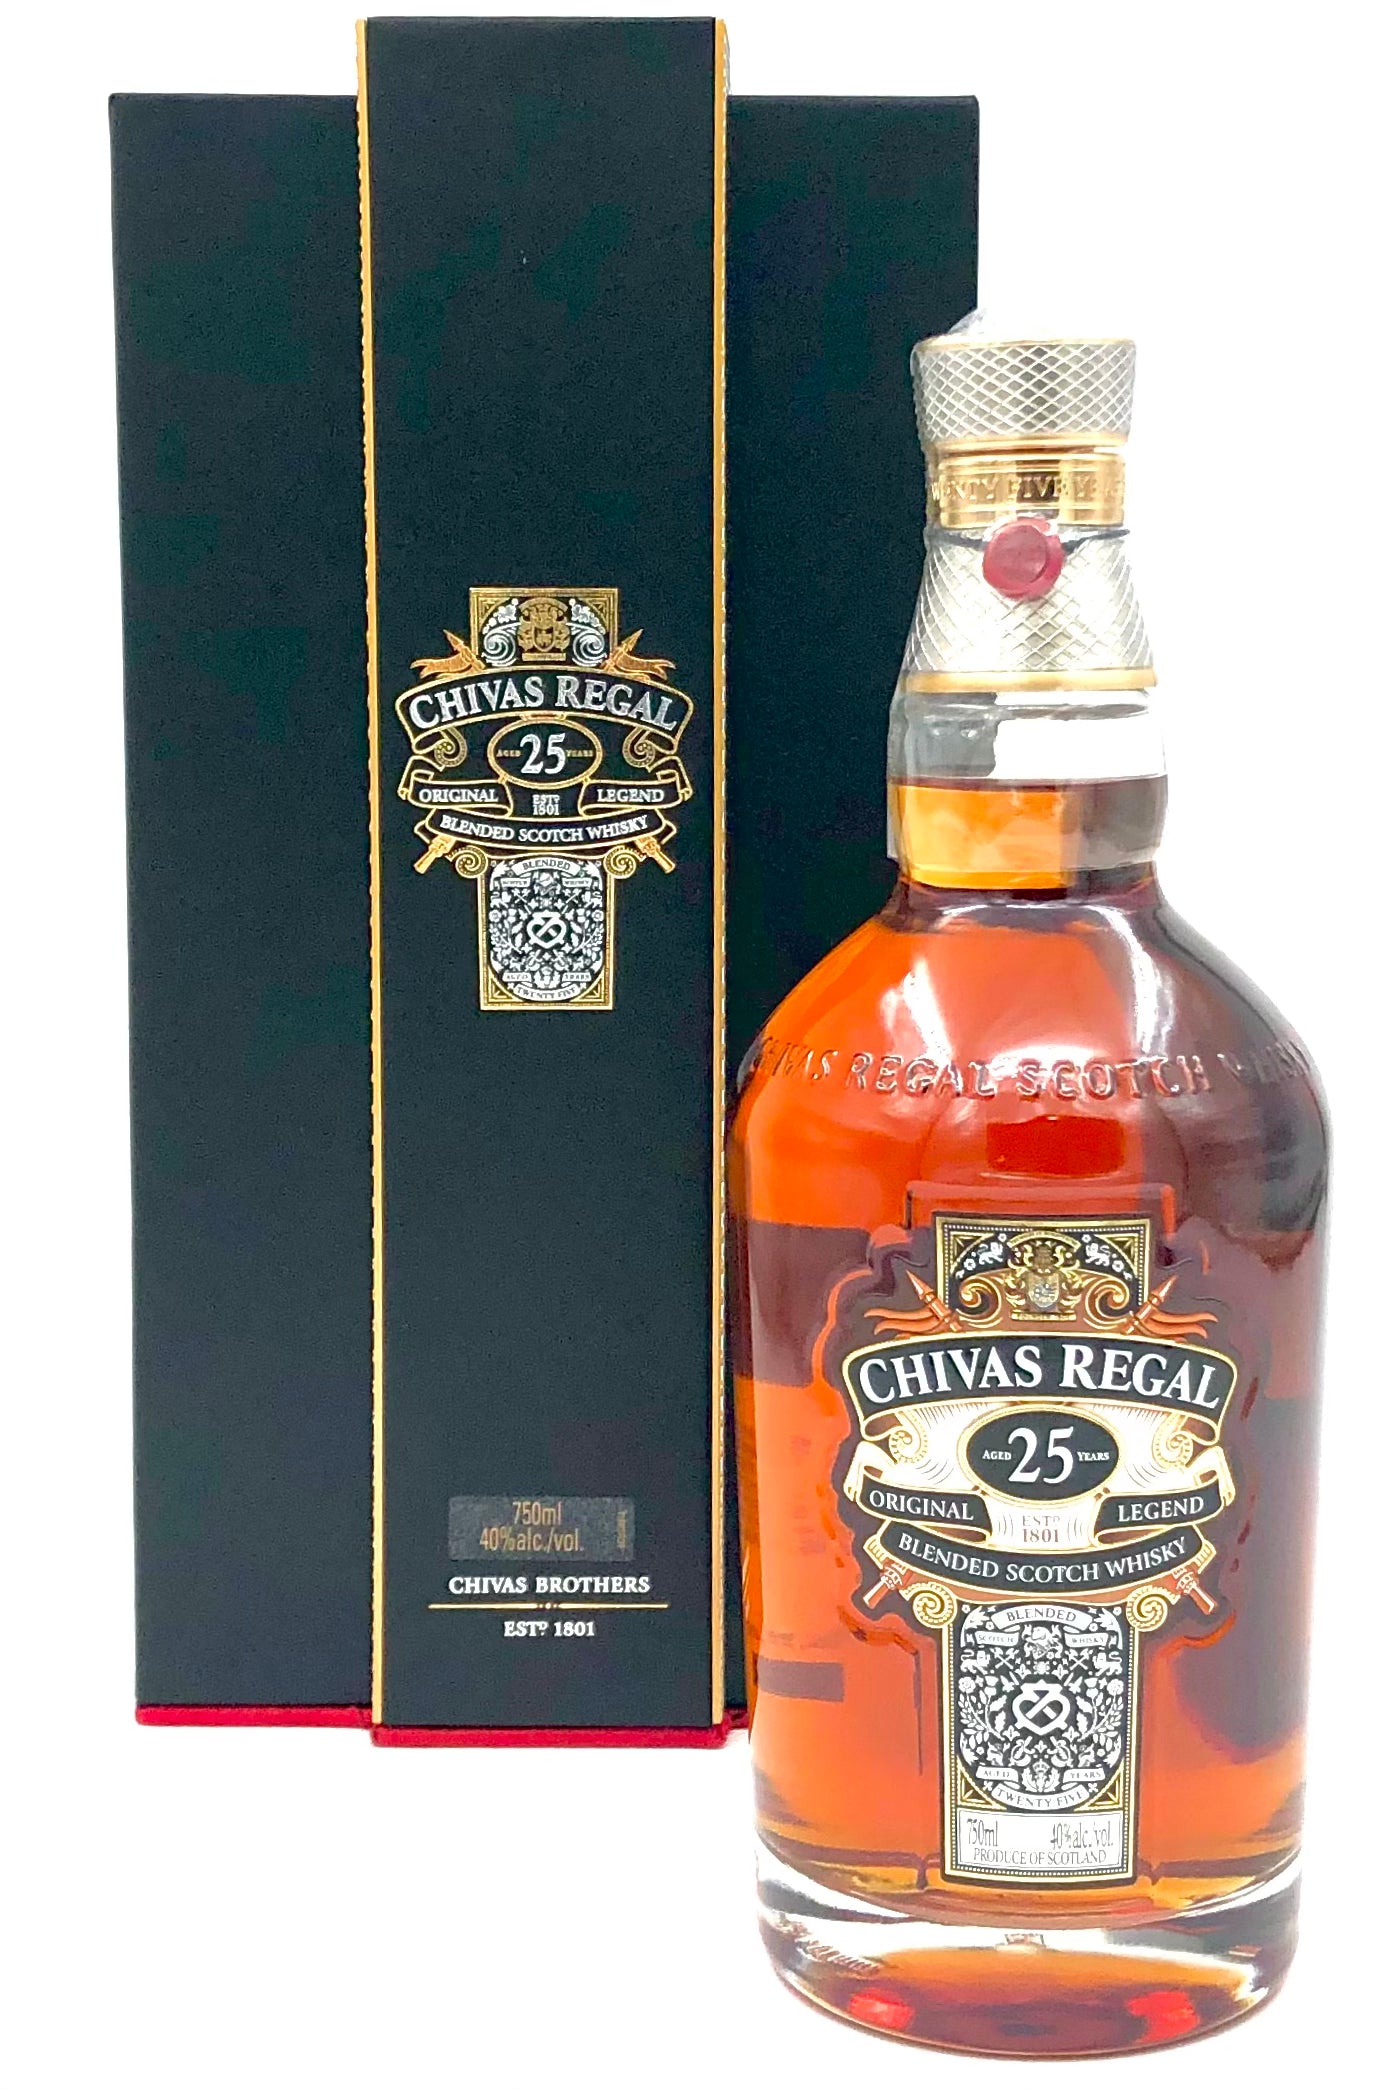 Chivas 25 Years Boxed Bottle At The Best Price. Buy Cheap With Bargains